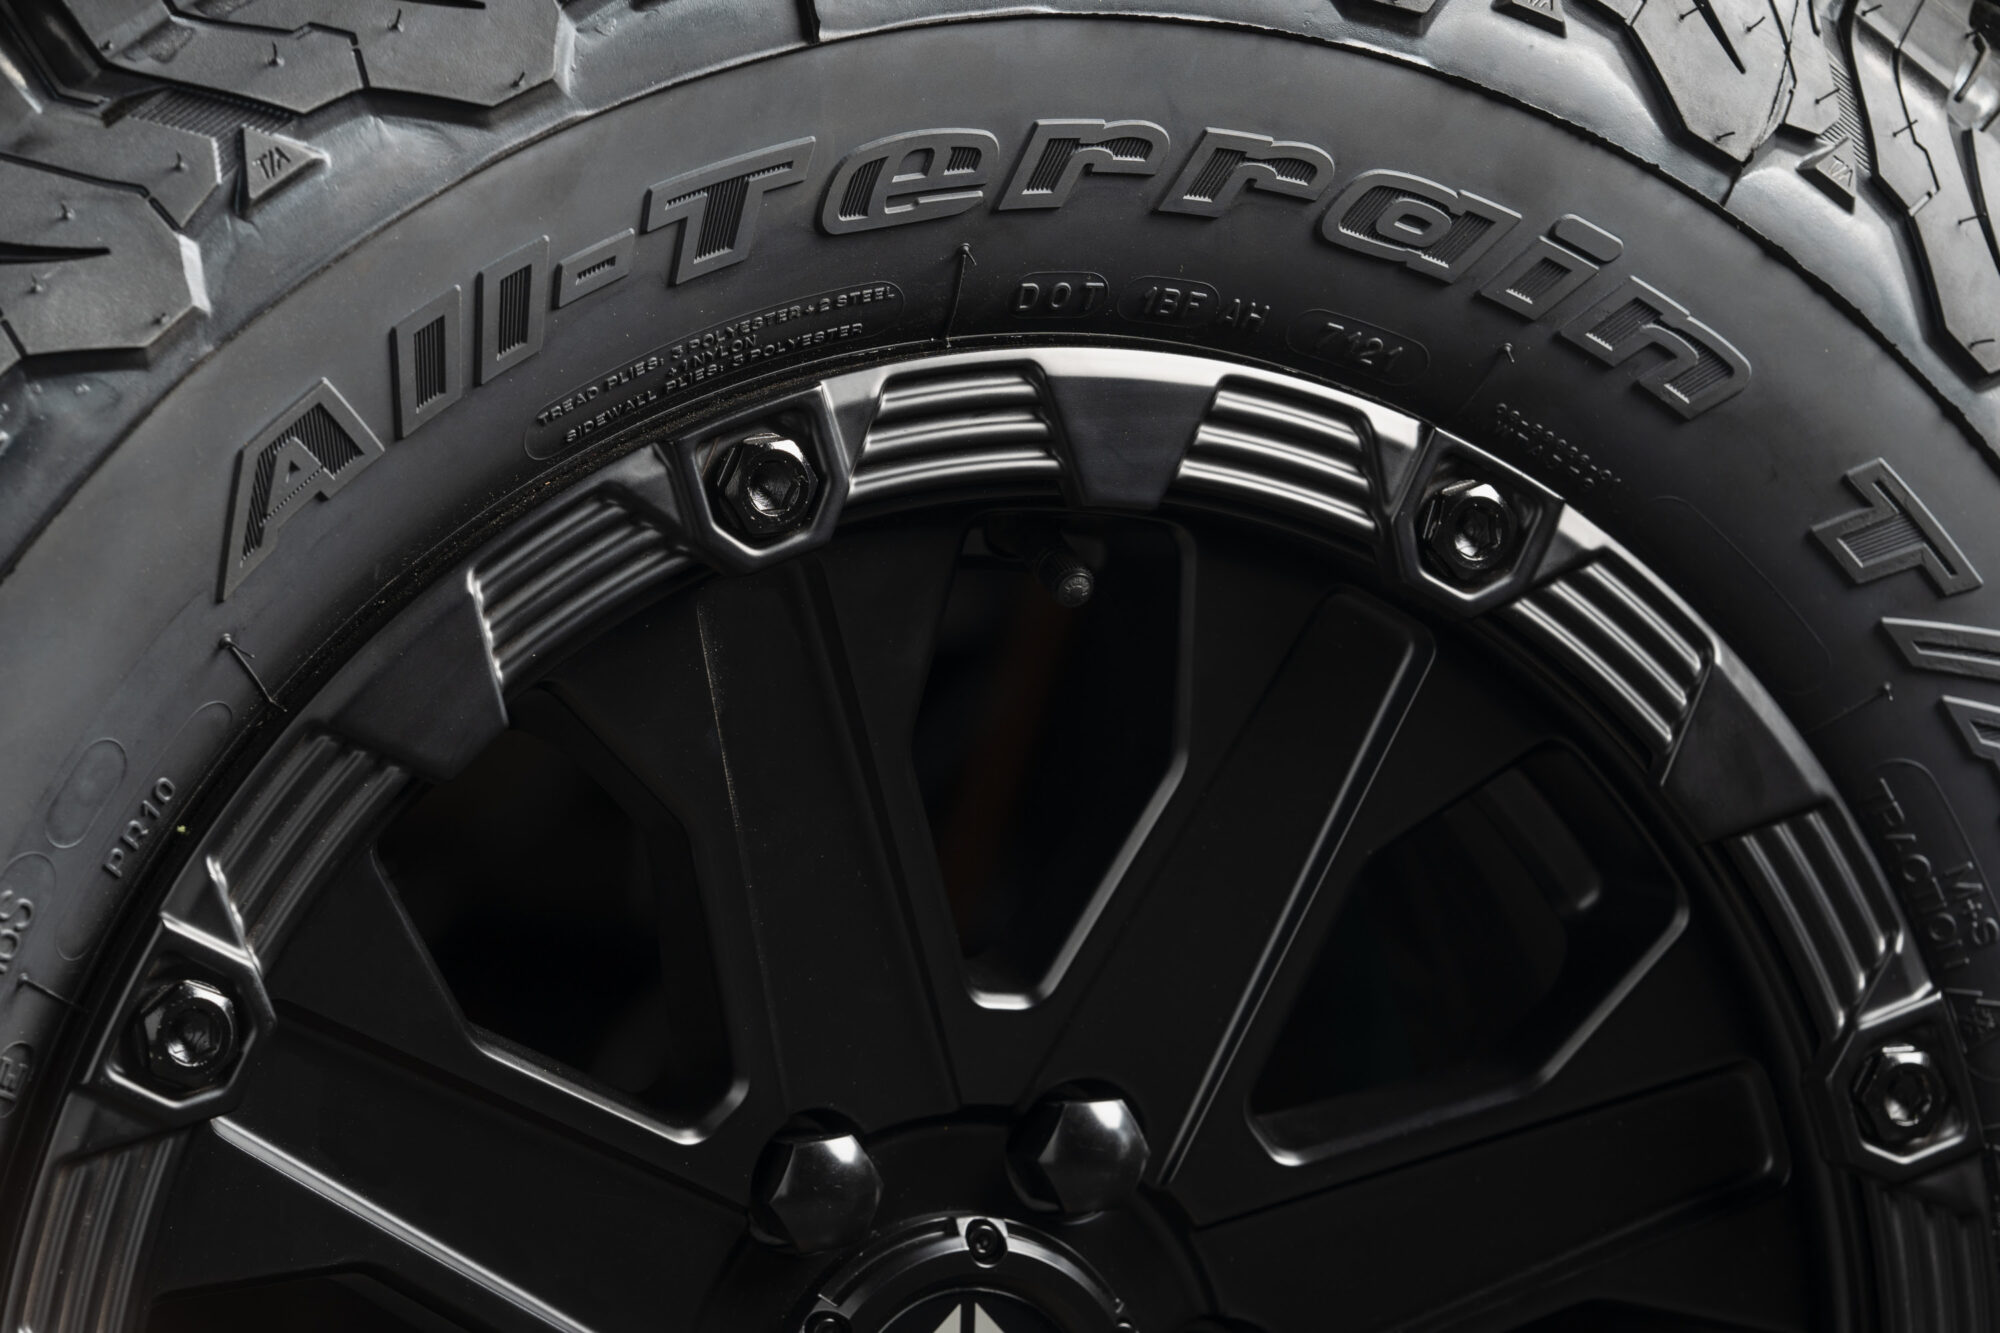 Close up of an Apex Wheel that says "All Terrain"